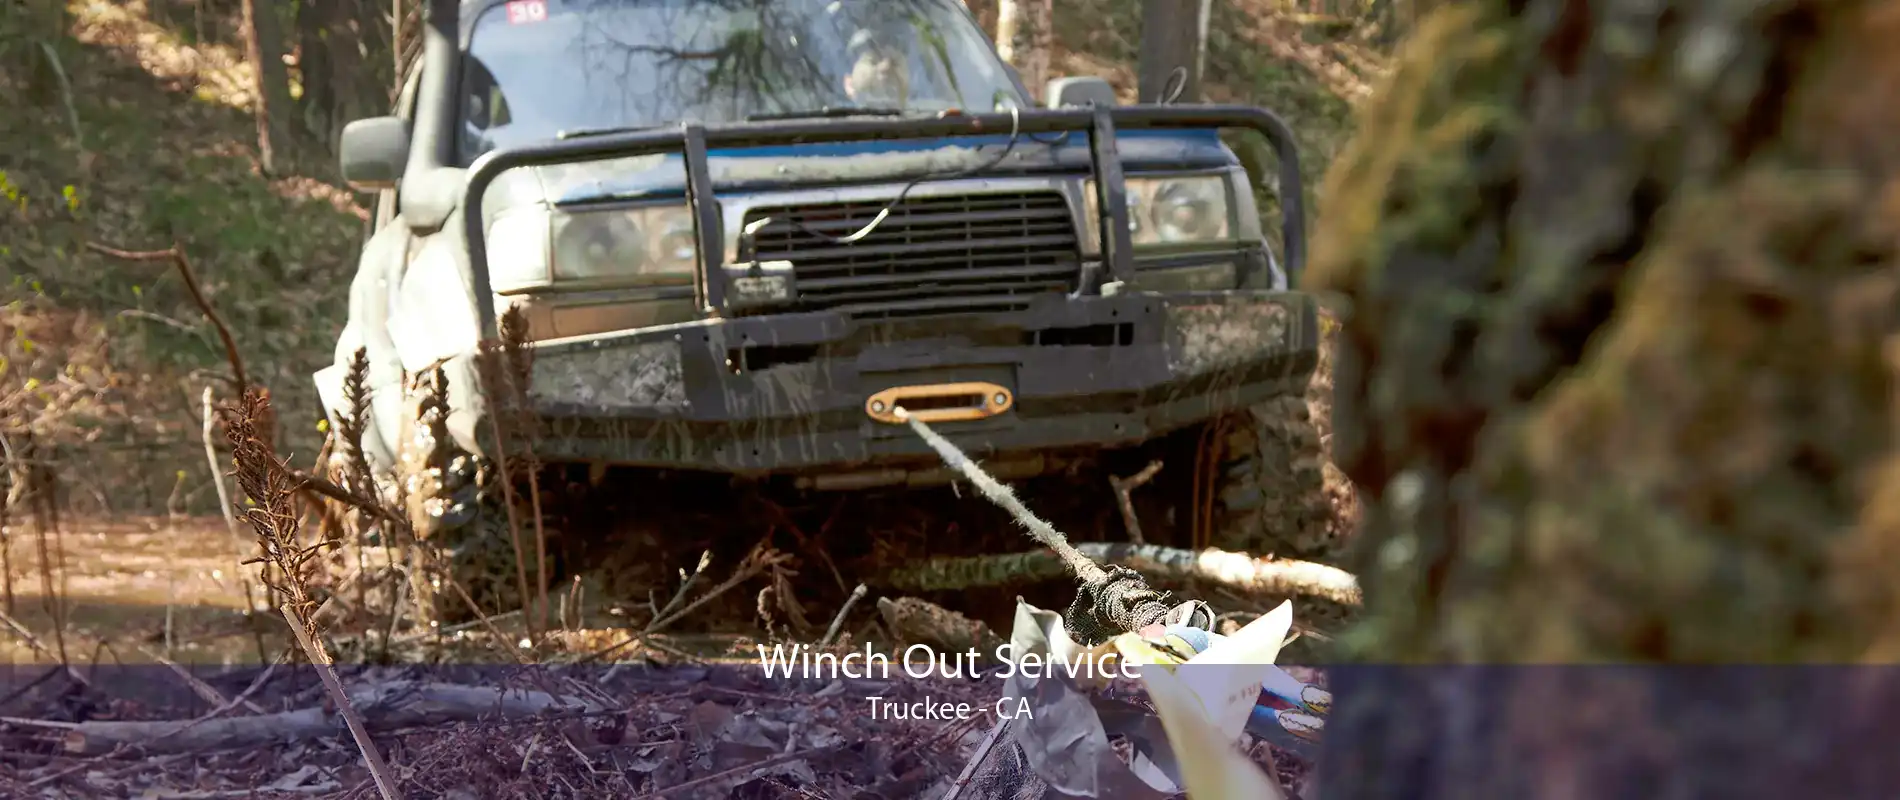 Winch Out Service Truckee - CA